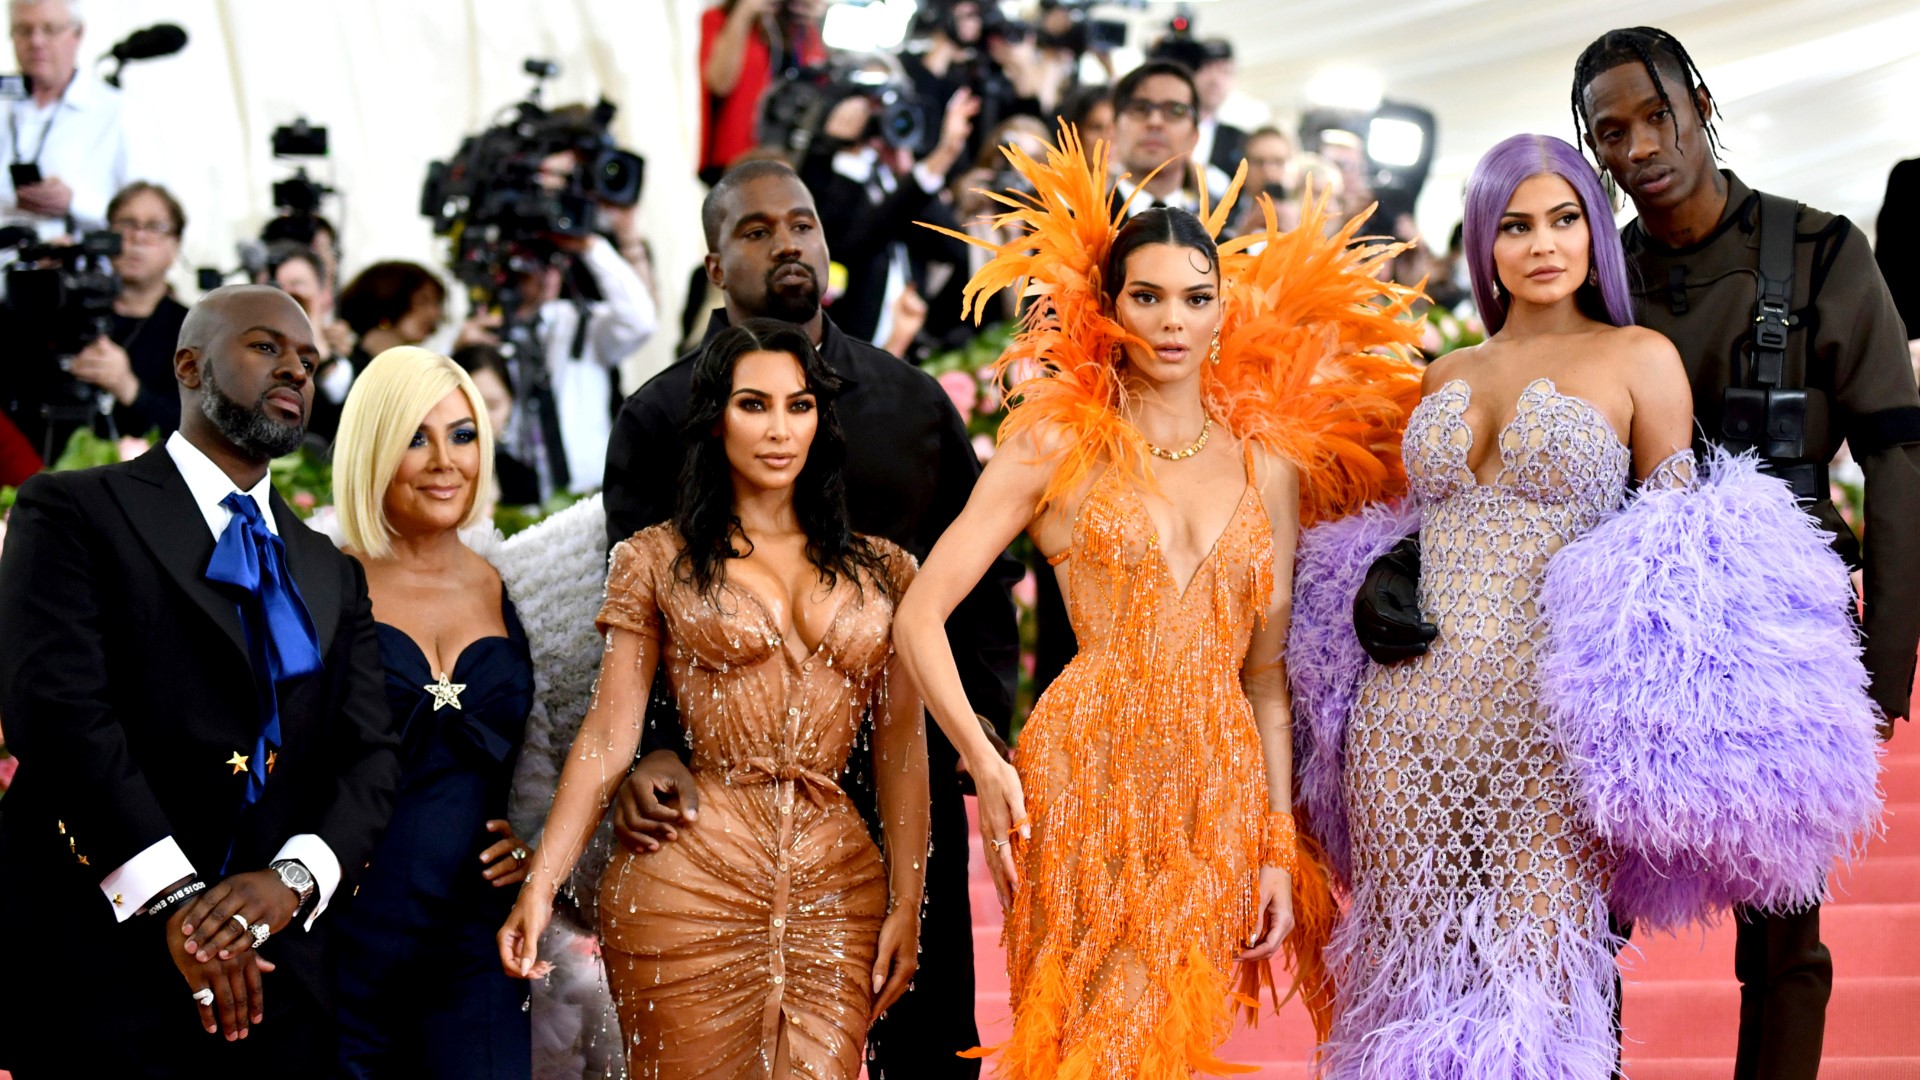 From Lady Gaga's four outfits, to Jared Leto's replica of his own head, here's what stood out at the 2019 Met Gala.